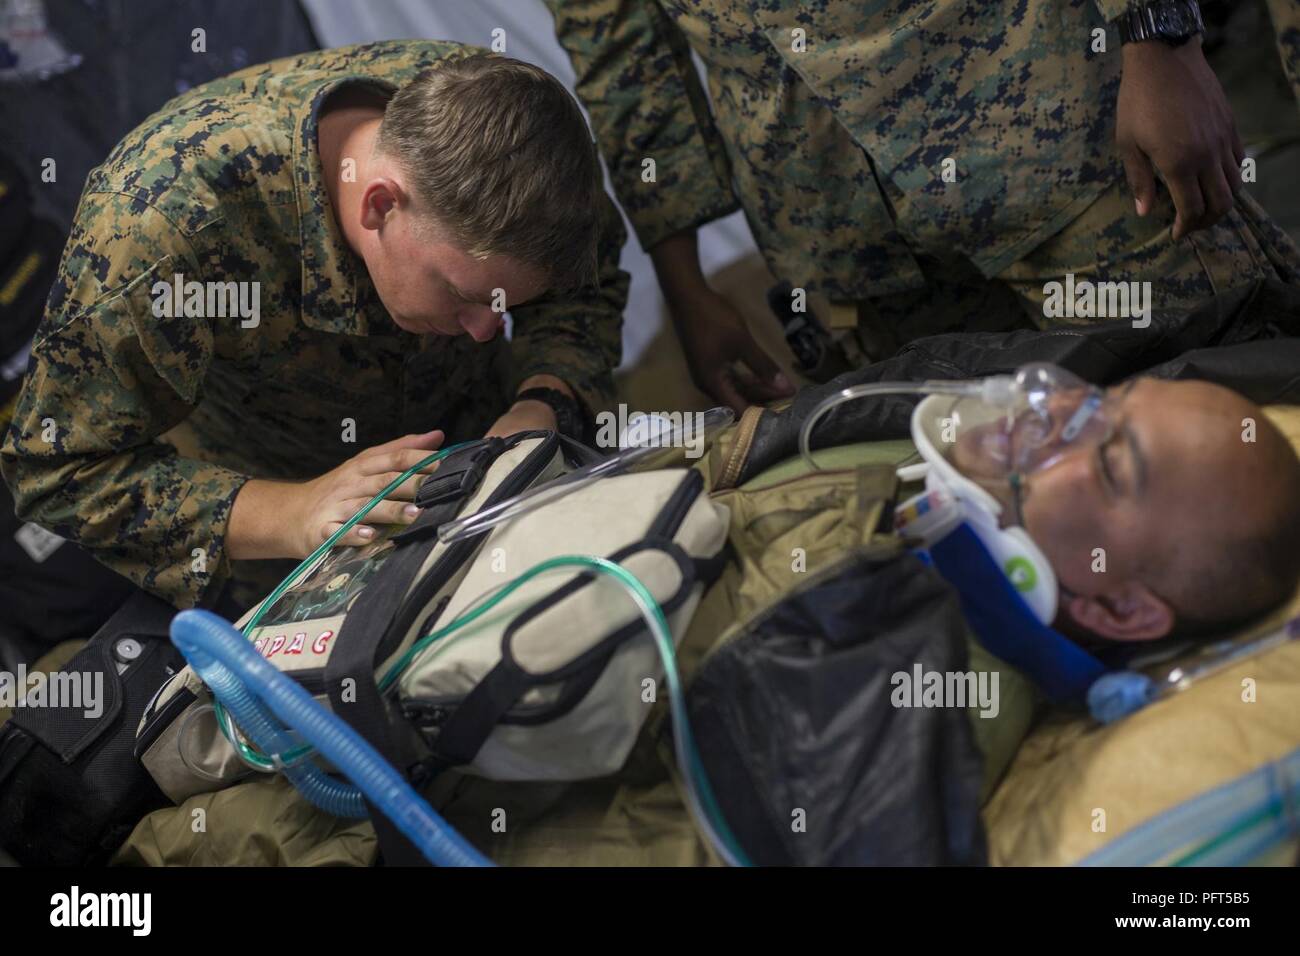 U.S. Navy Petty Officer 3rd Class Colin Liddicote with 2nd Medical Battalion, 2nd Marine Logistics Group, prepares a simulated casualty for casualty evacuation inside a Rule 2 Shock Trauma Platoon field surgical tent during a command post exercise on Landing Zone Egret, Camp Lejeune, N.C., May 21, 2018. 2nd Med. Bn. conducted a CPX in order to improve its warfighting readiness in command and control of Surgical Company. Stock Photo